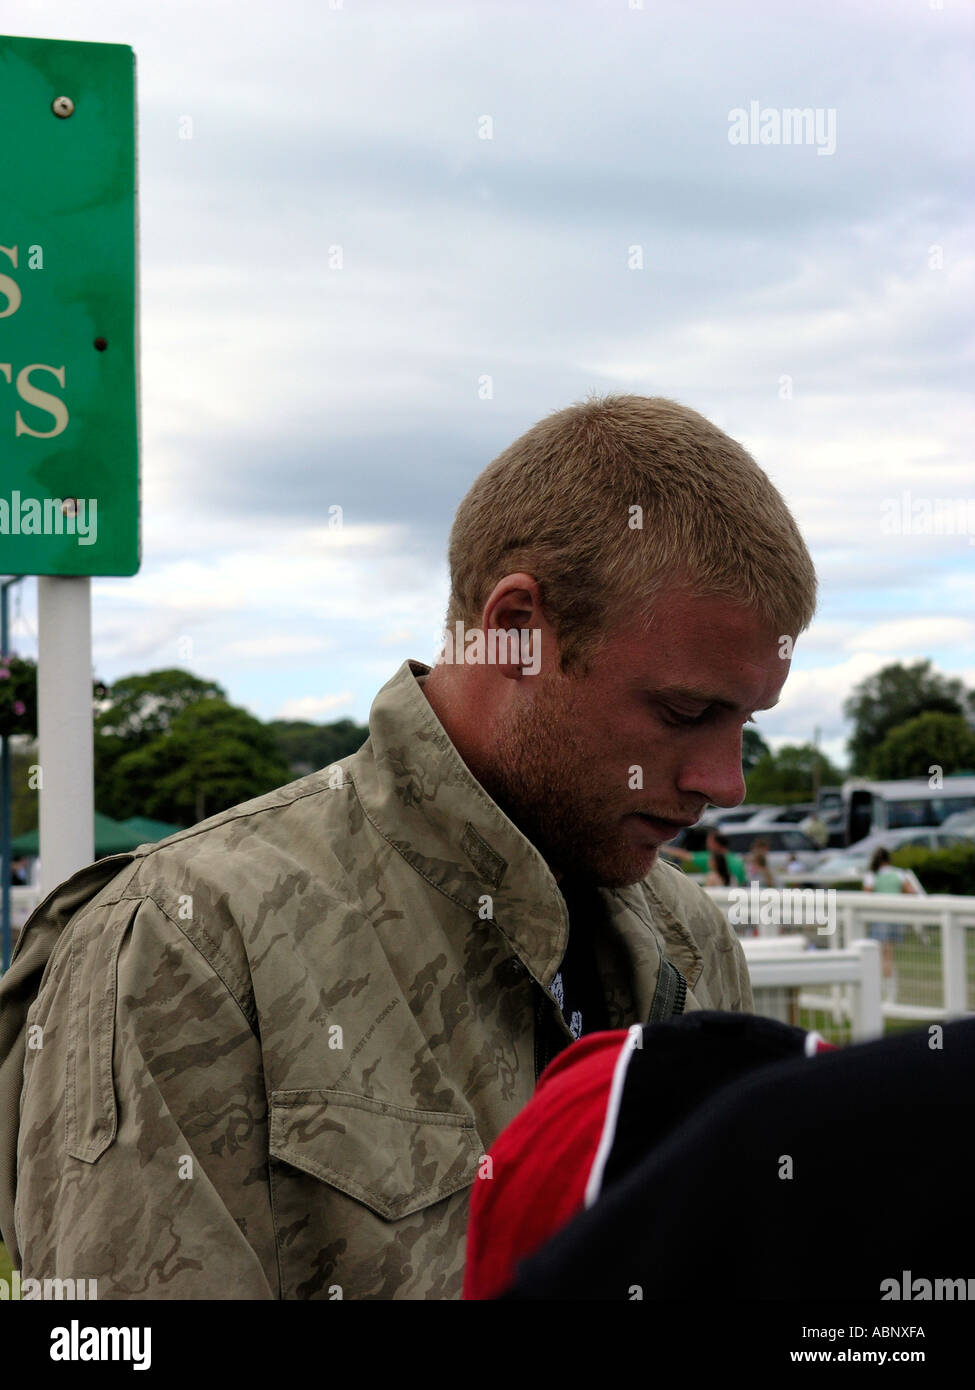 England Cricketer Andrew Flintoff signing autographs at Cartmel races in Cumbria England Stock Photo